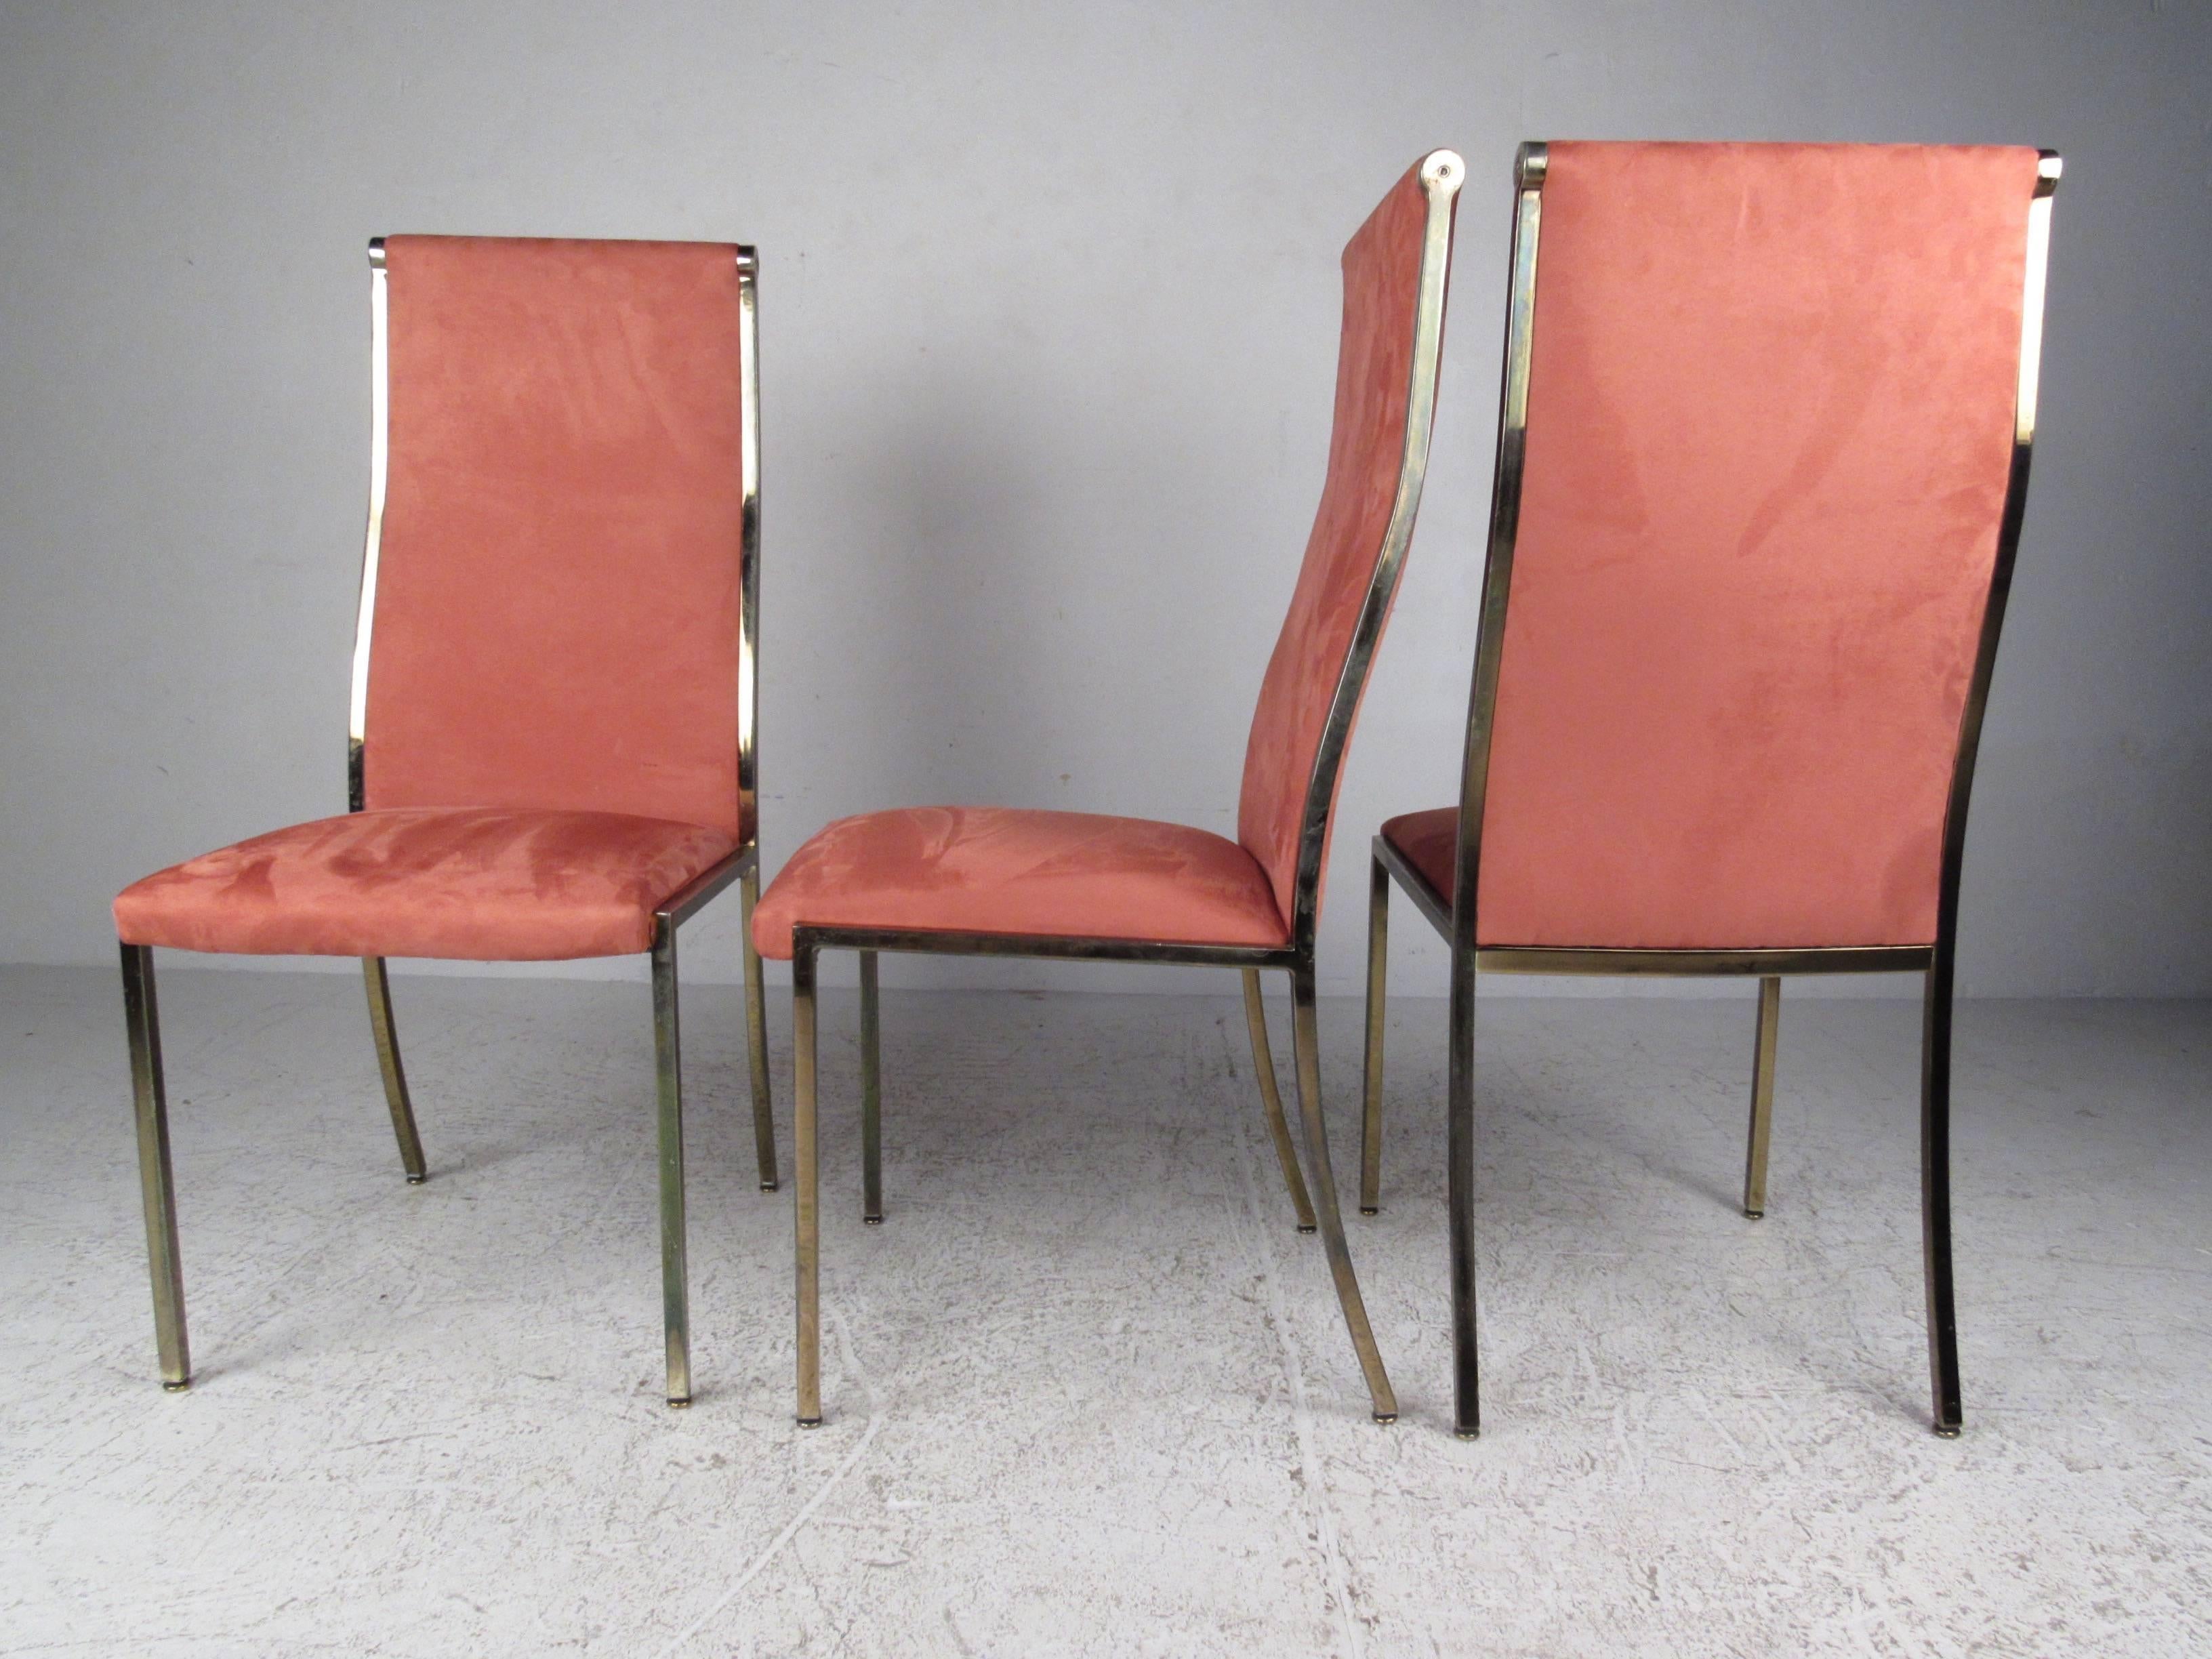 Six Mid-Century Regency style dining chairs with a curving high back. Faux suede upholstery on front and back with a golden brass frame.

(Please confirm item location - NY or NJ - with dealer).
 